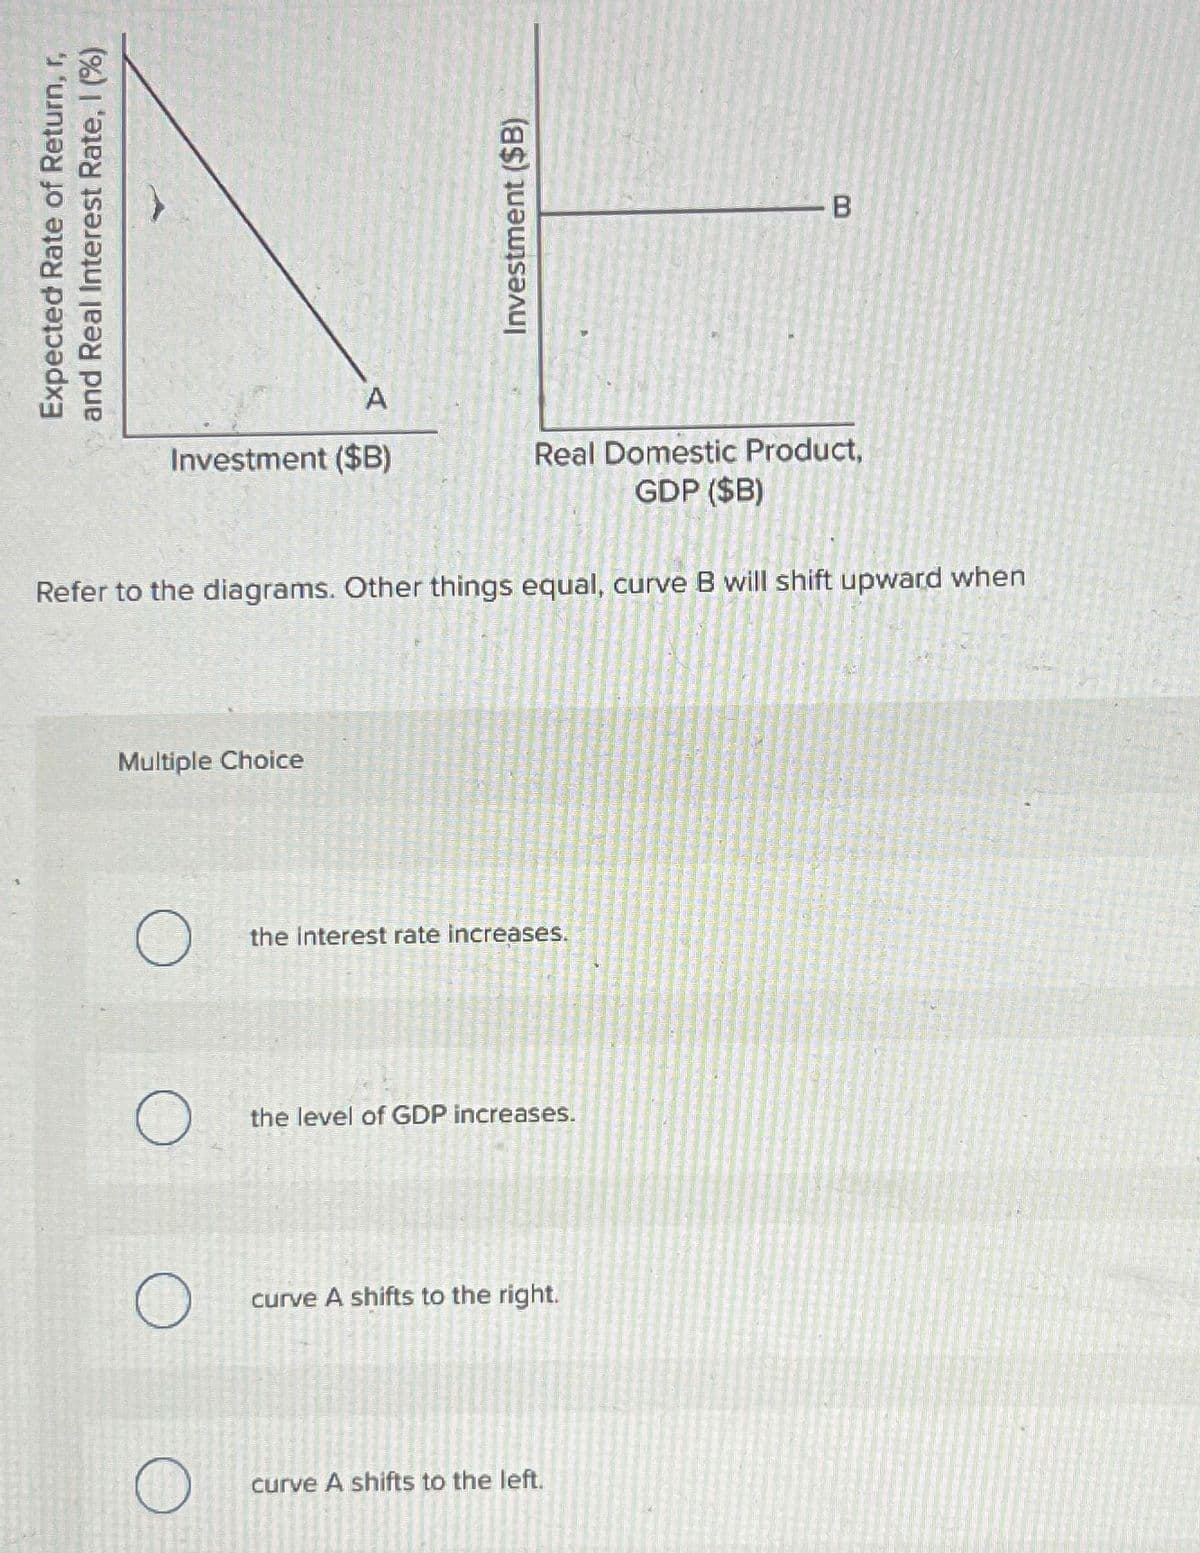 Expected Rate of Return, r,
and Real Interest Rate, I (%)
A
Investment ($B)
Multiple Choice
O
Refer to the diagrams. Other things equal, curve B will shift upward when
O
Investment ($B)
O
Real Domestic Product,
GDP ($B)
the interest rate increases.
the level of GDP increases.
-B
curve A shifts to the right.
curve A shifts to the left.